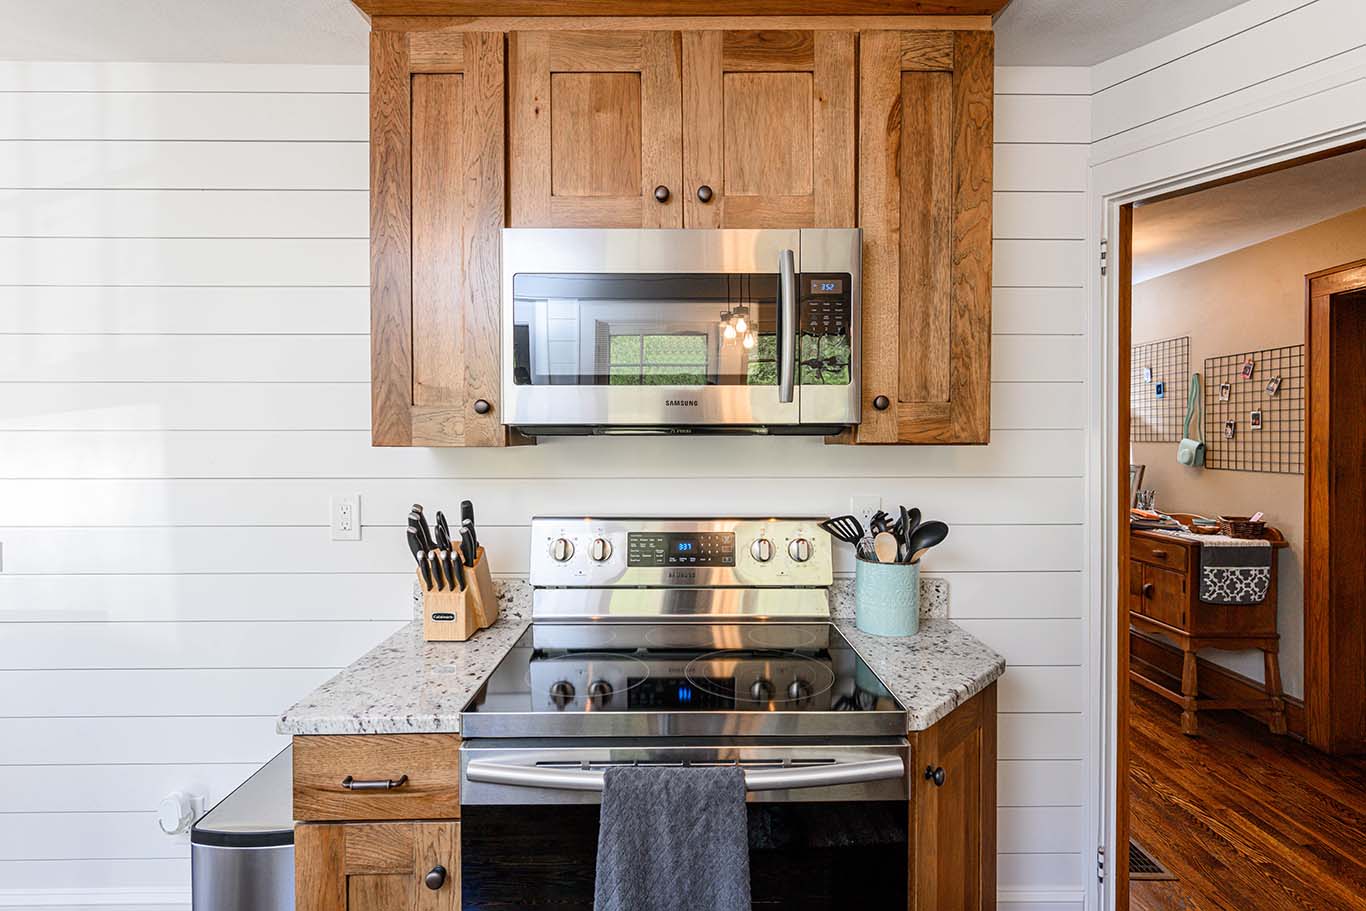 Save countertop space by using an over the stove microwave